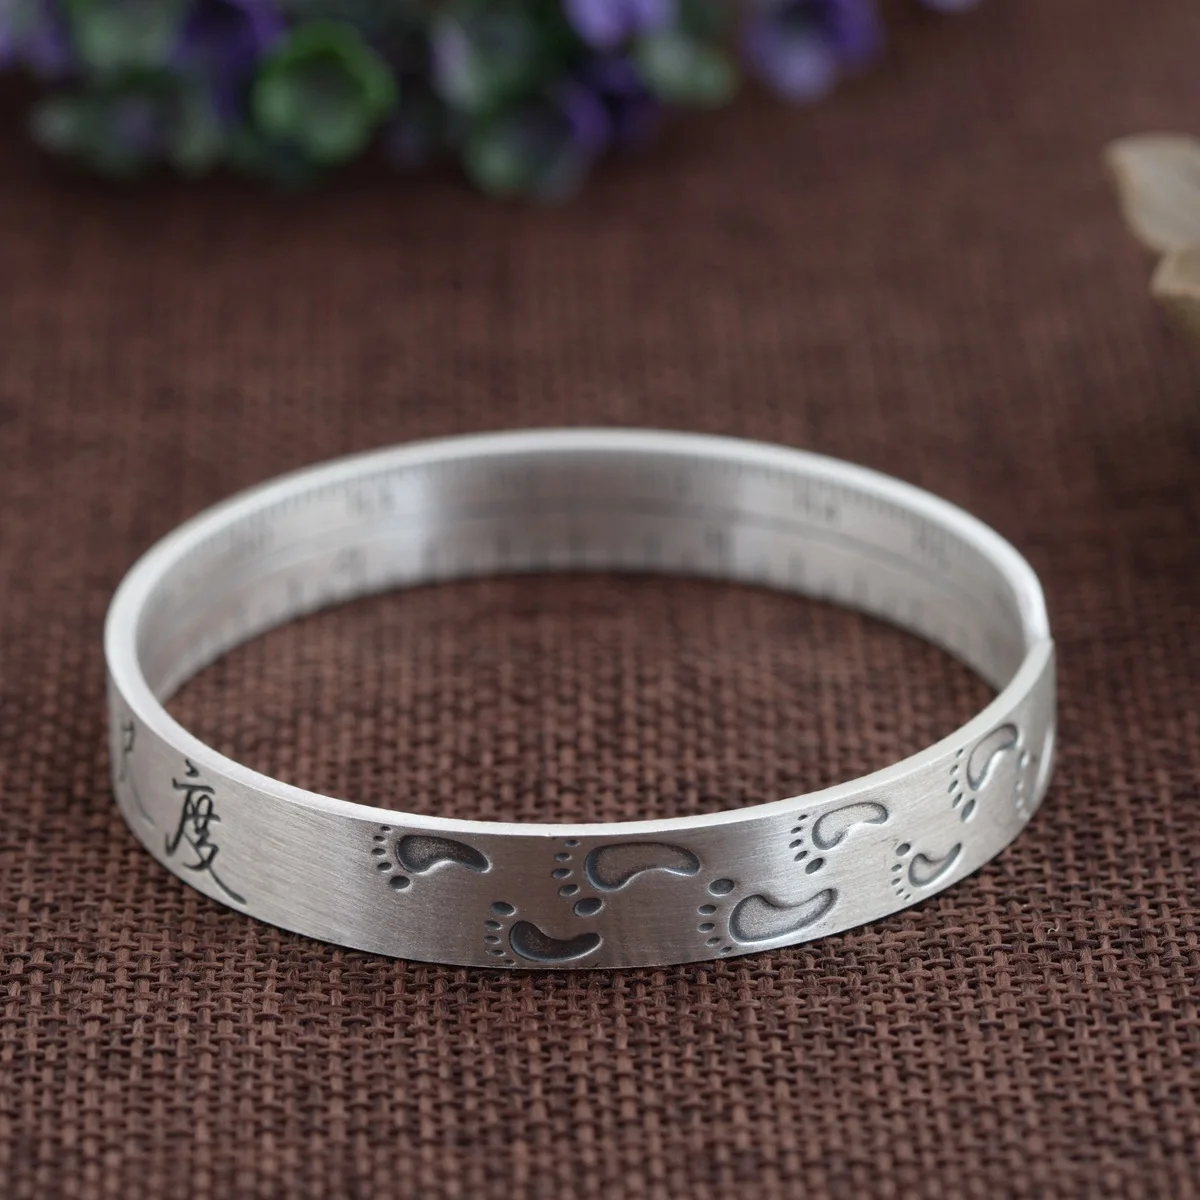 

Goldeer wangcz S999 Pure Silver Vintage Style Thai Silver Men And Women Life Should Have a Scale Ruler Bracelet